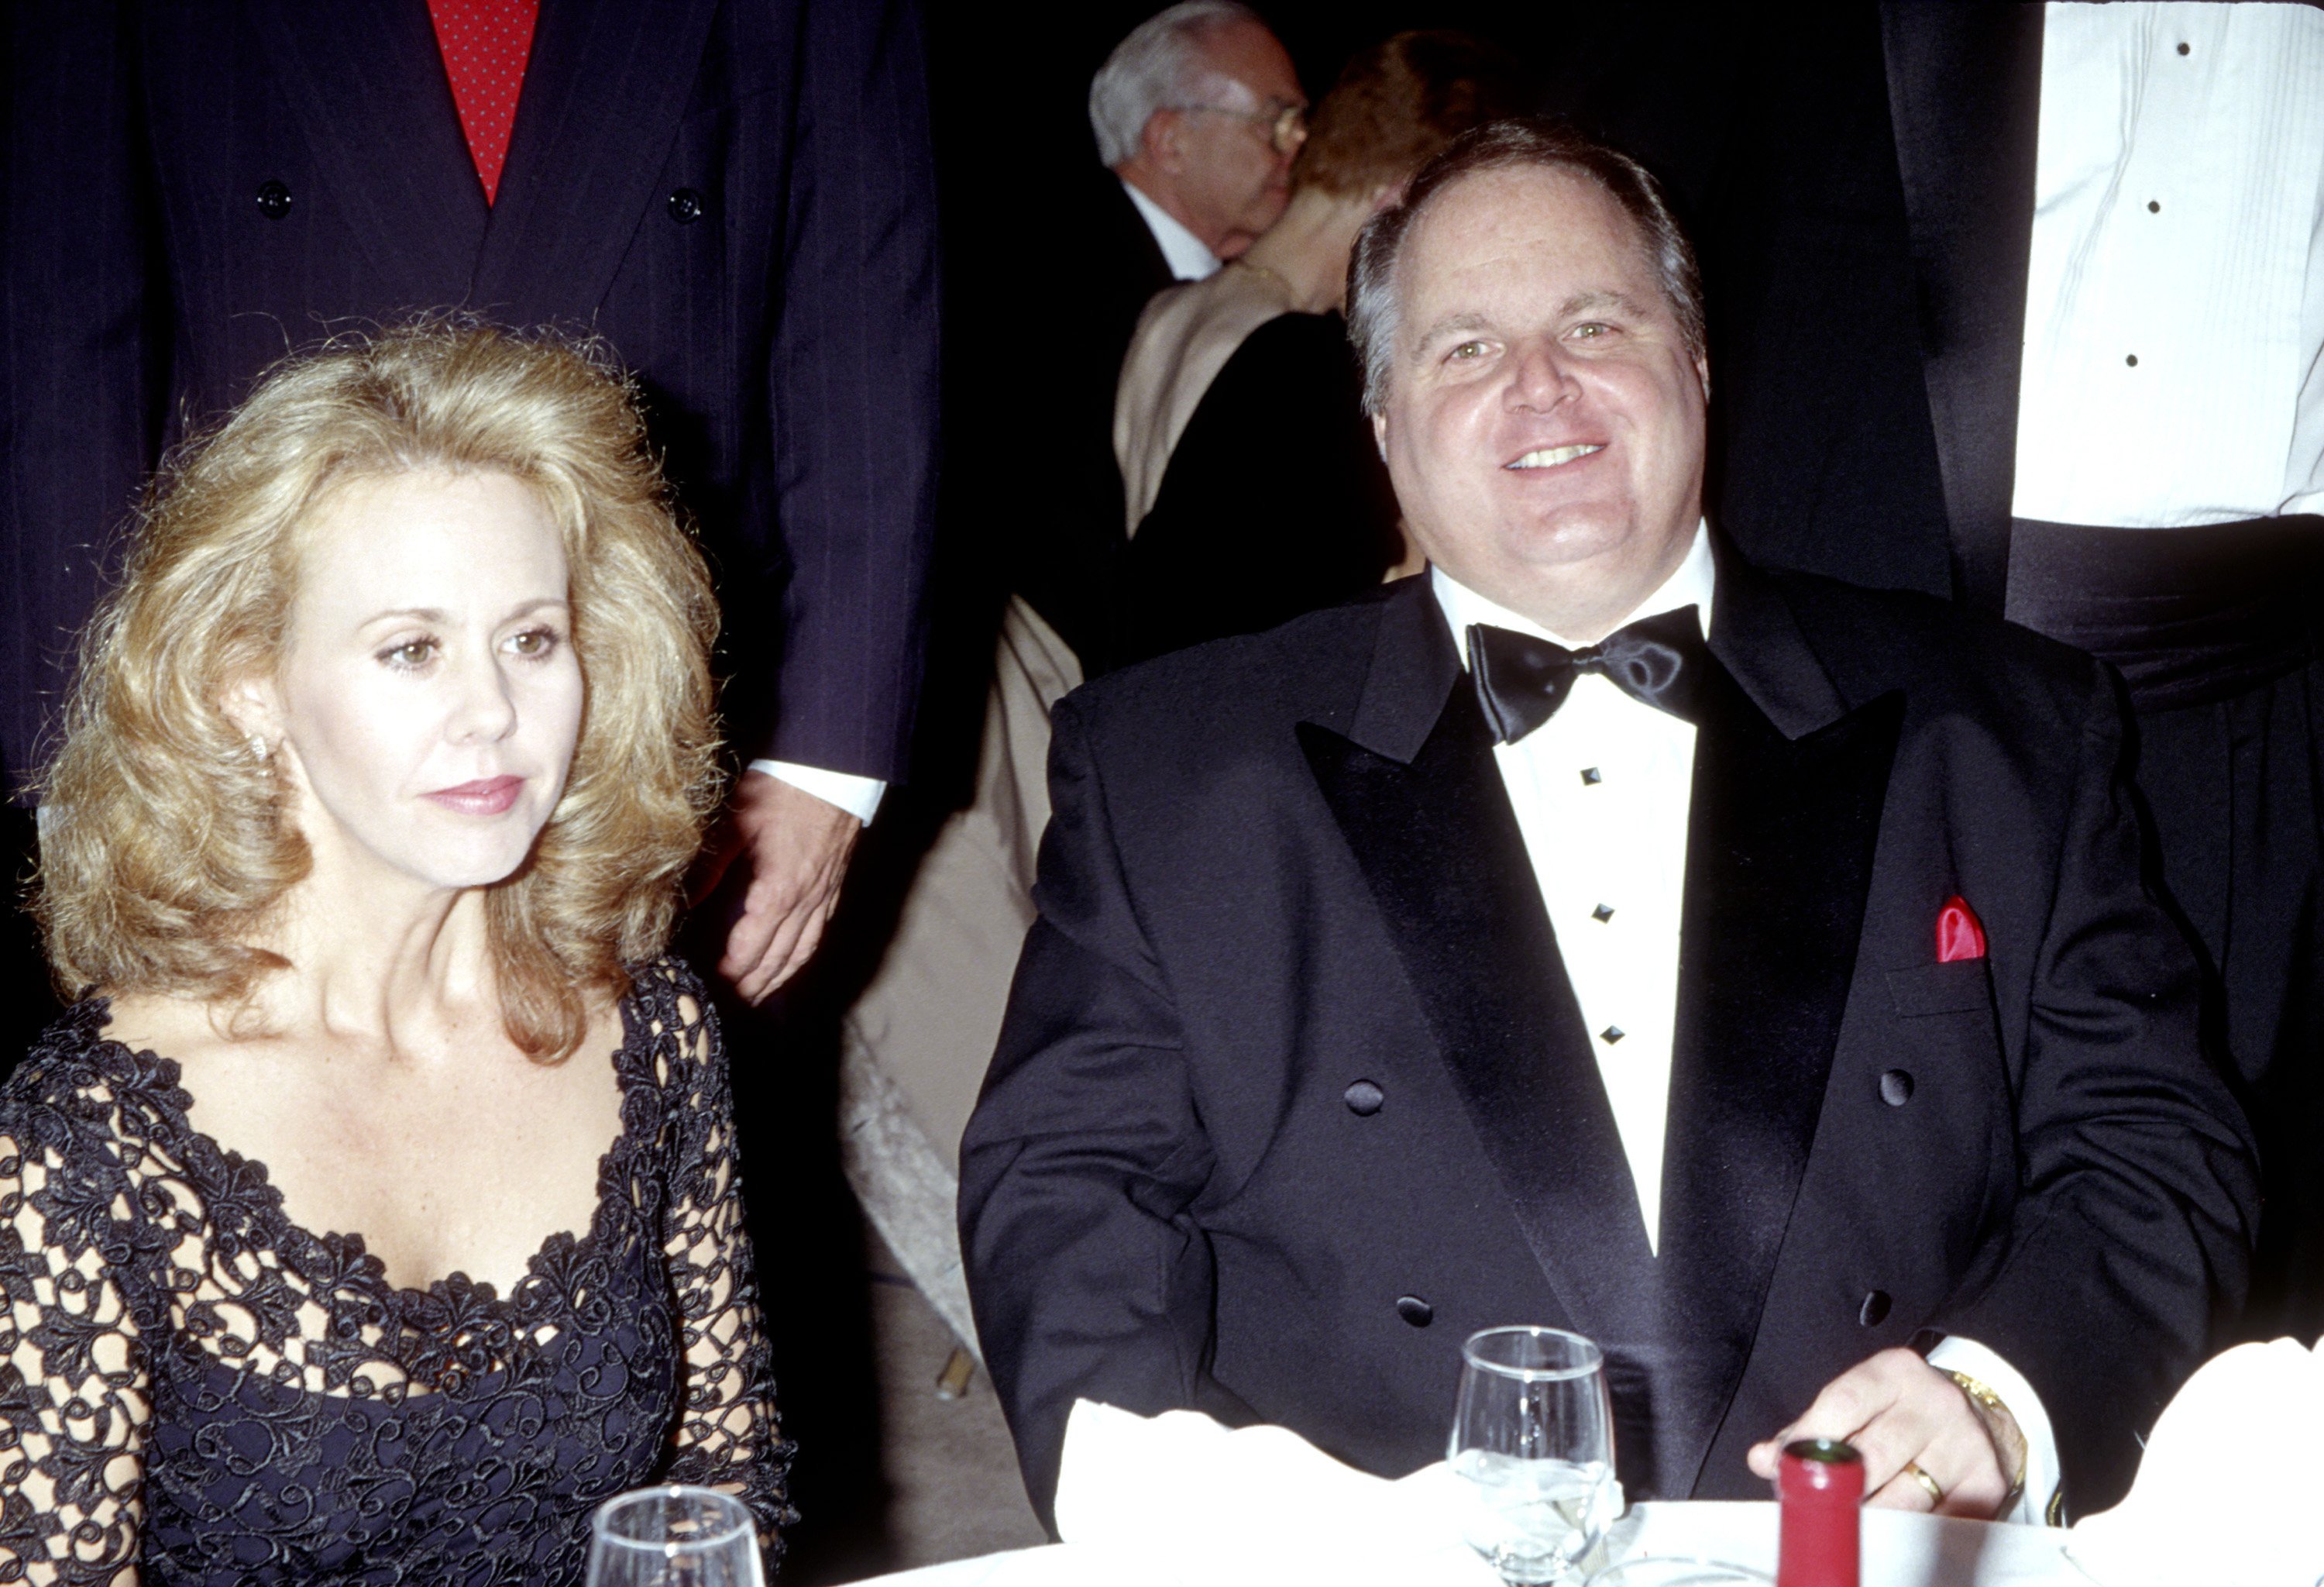 Rush Limbaugh and his wife during Center For Study of Popular Culture Dinner In Honor of Charlton Heston at Century Plaza Hotel in Century City, CA, United States. | Source: Getty Images